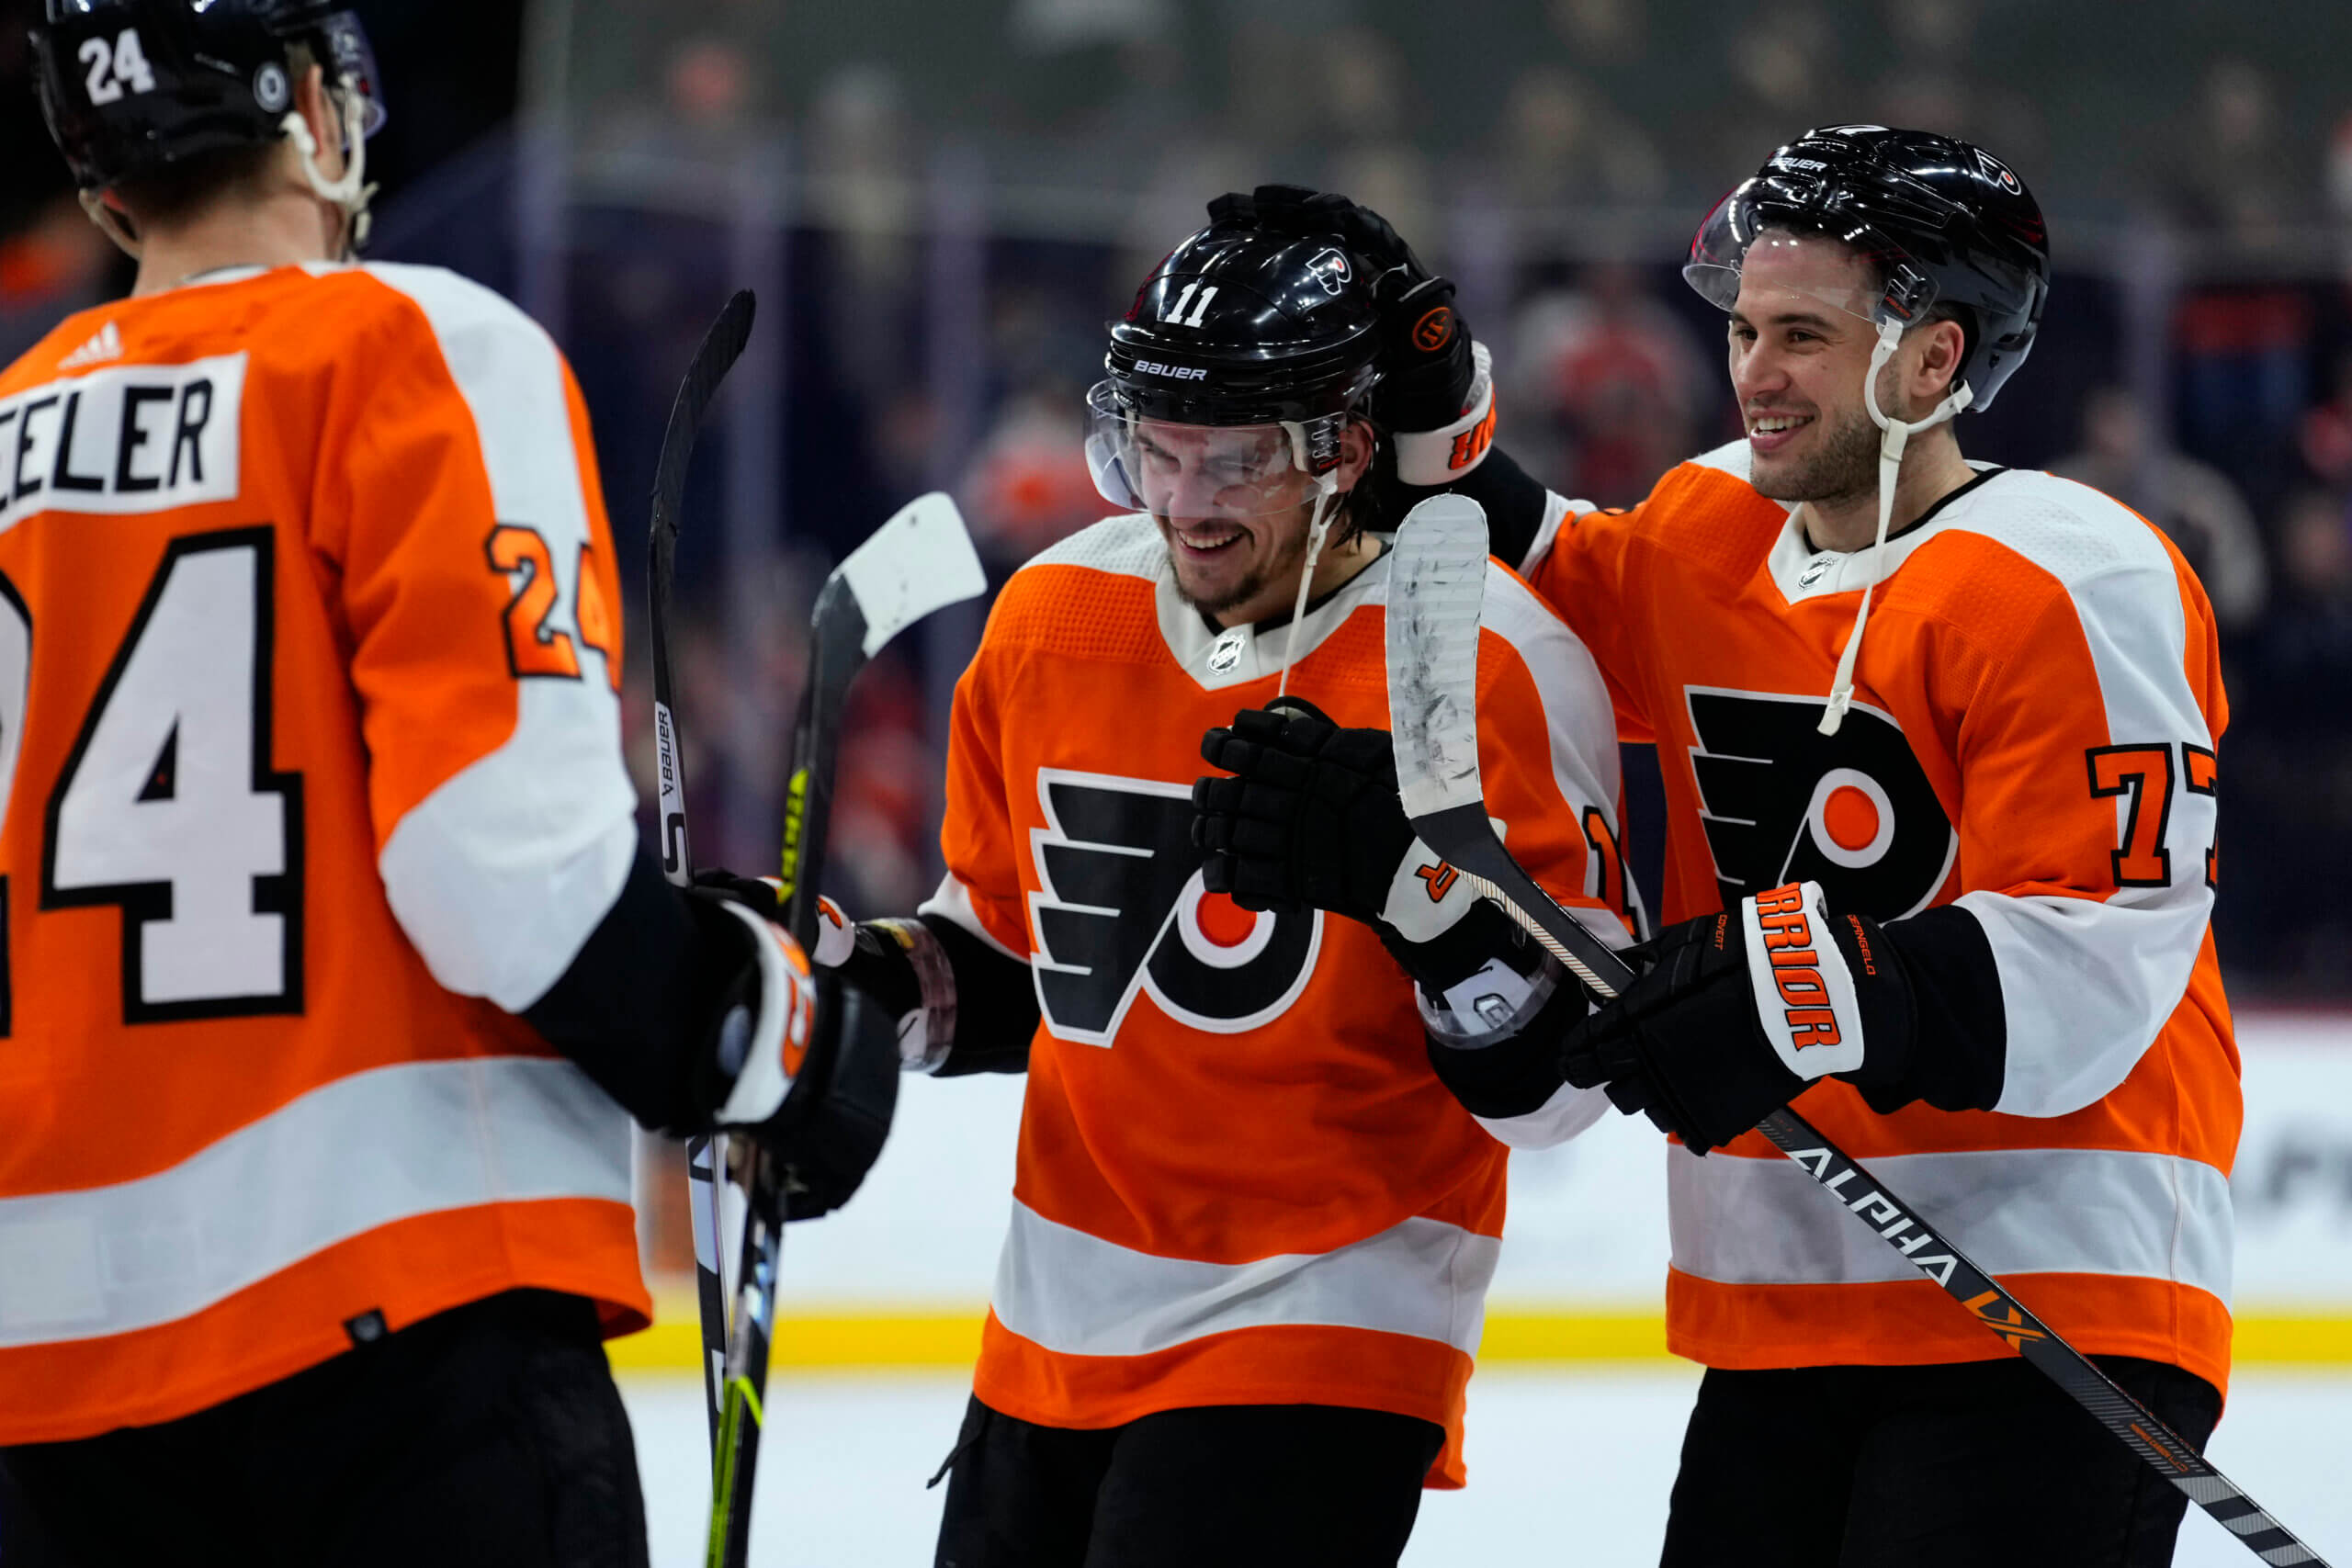 Philadelphia Flyers unveil new jersey to be worn in select games